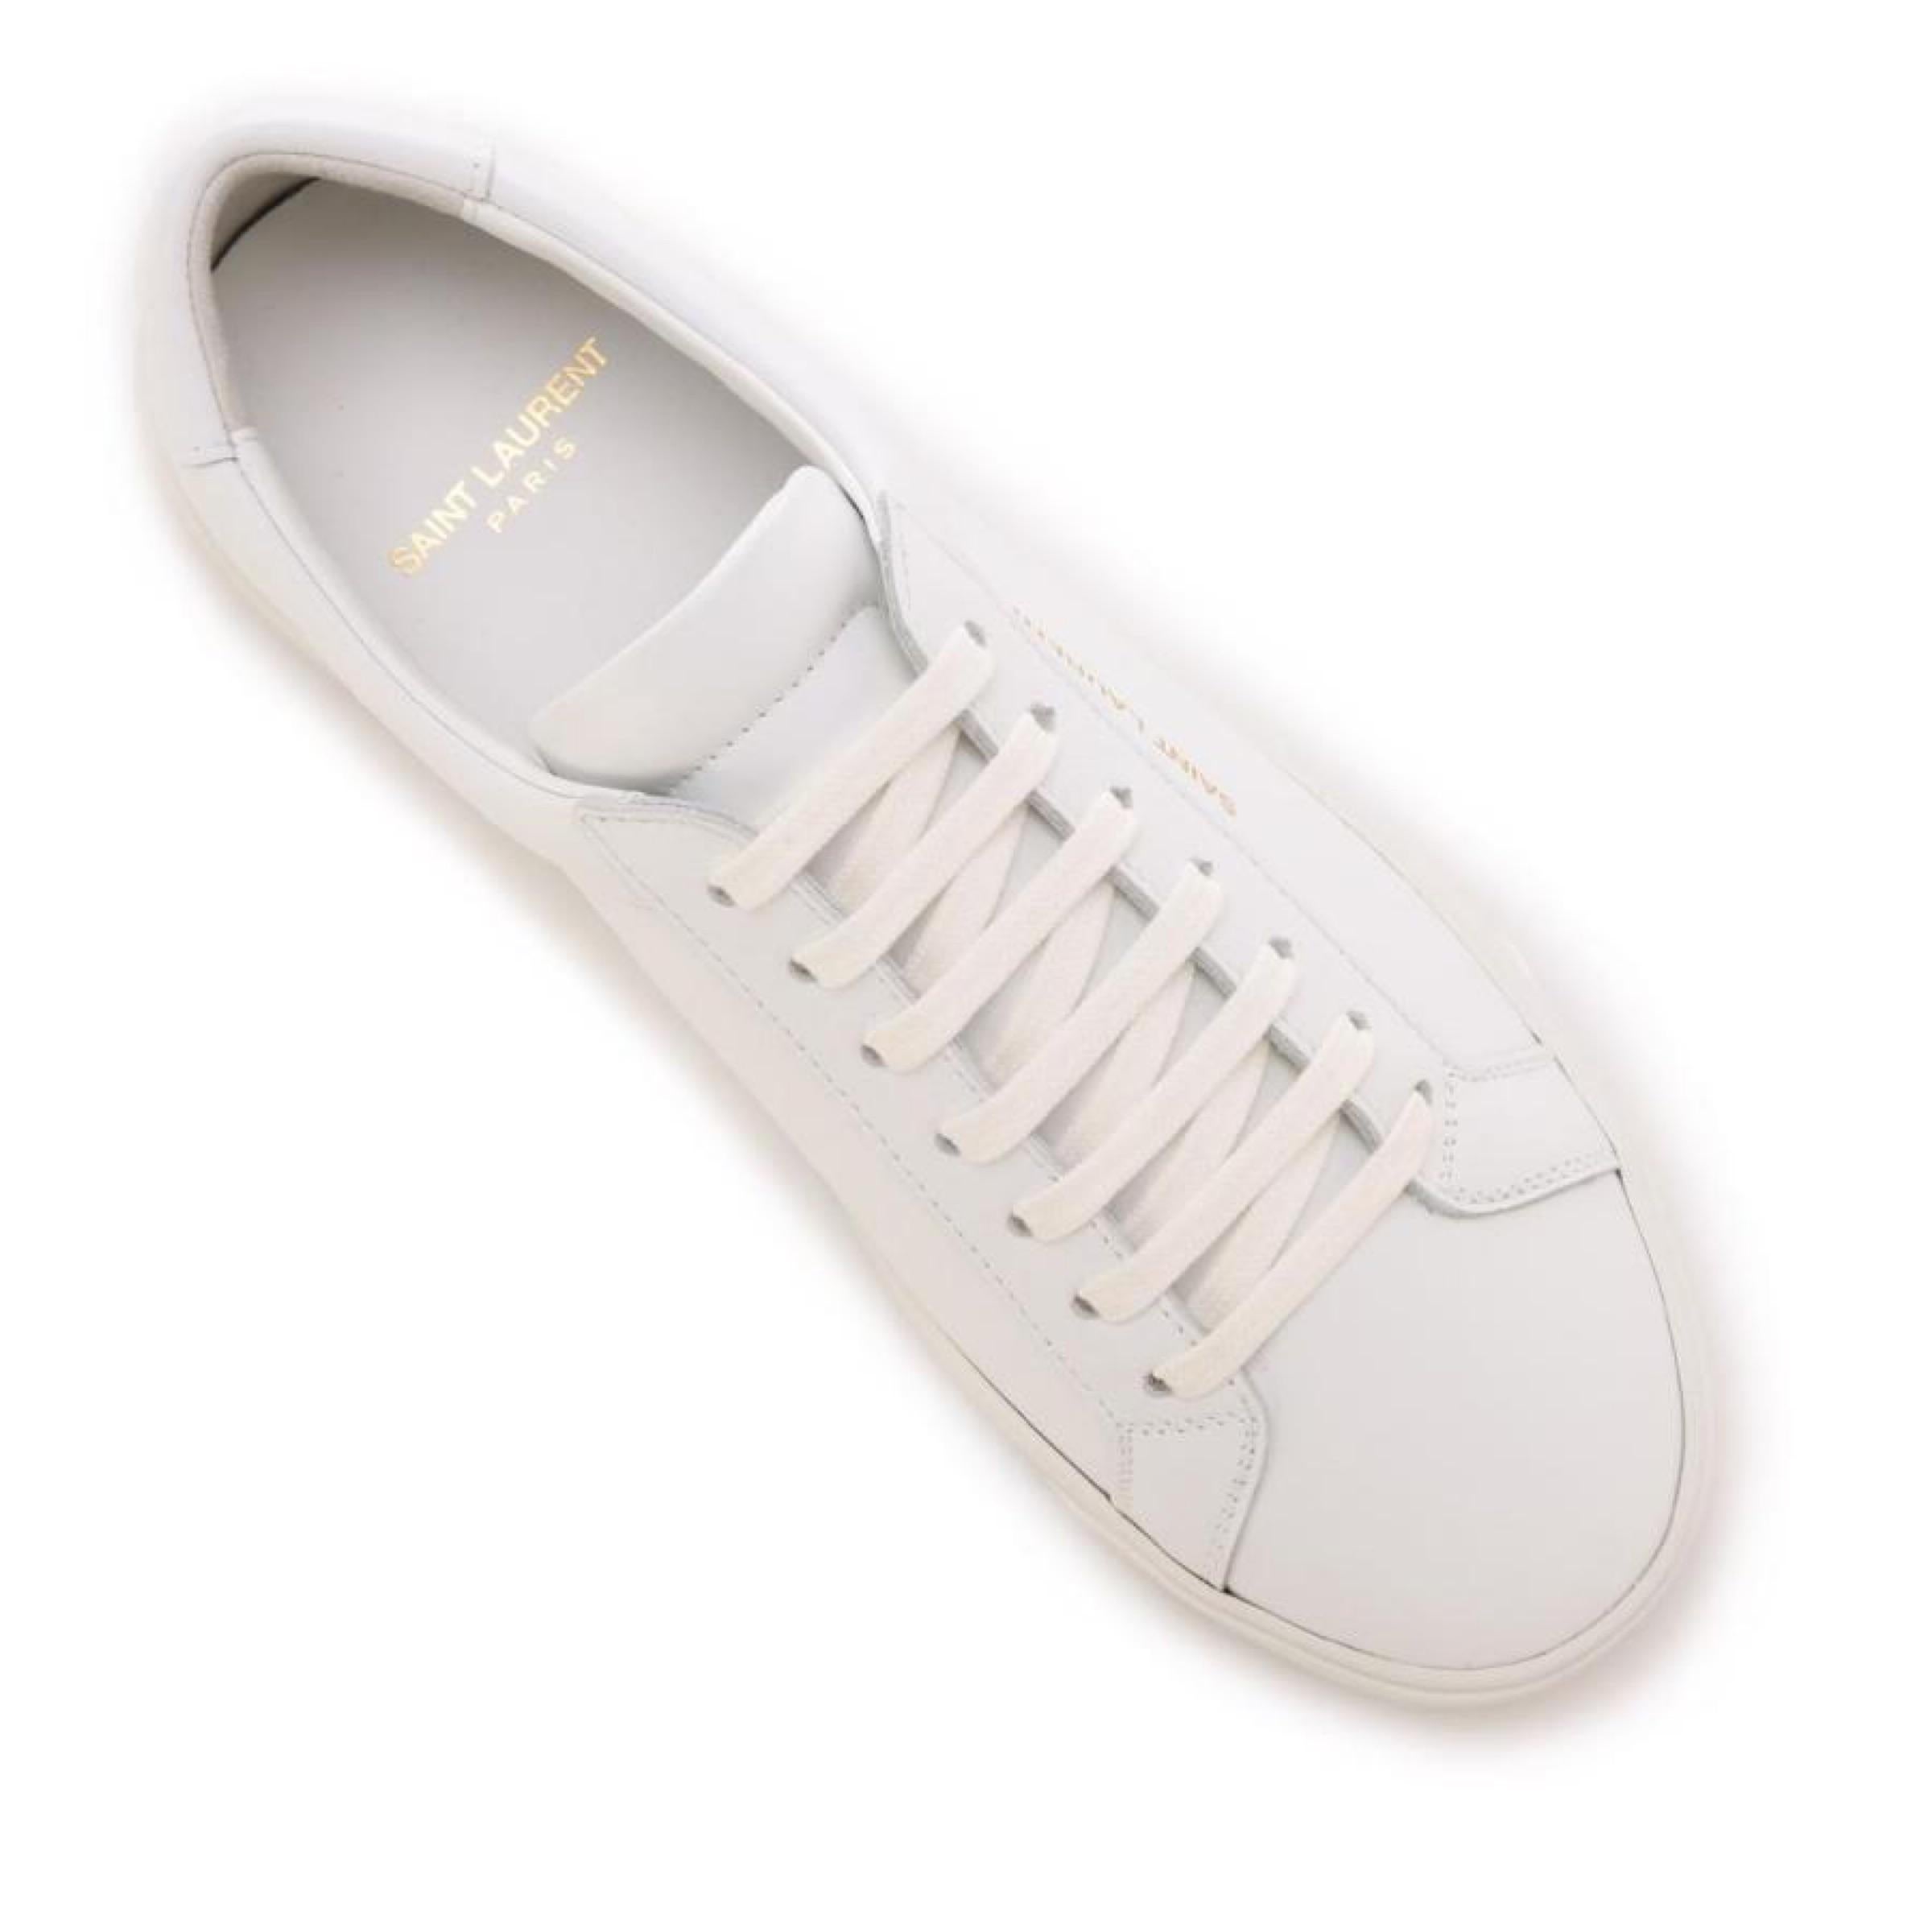 NEW Saint Laurent White Andy Leather Sneakers Size 39.5 EU 9.5 US 2